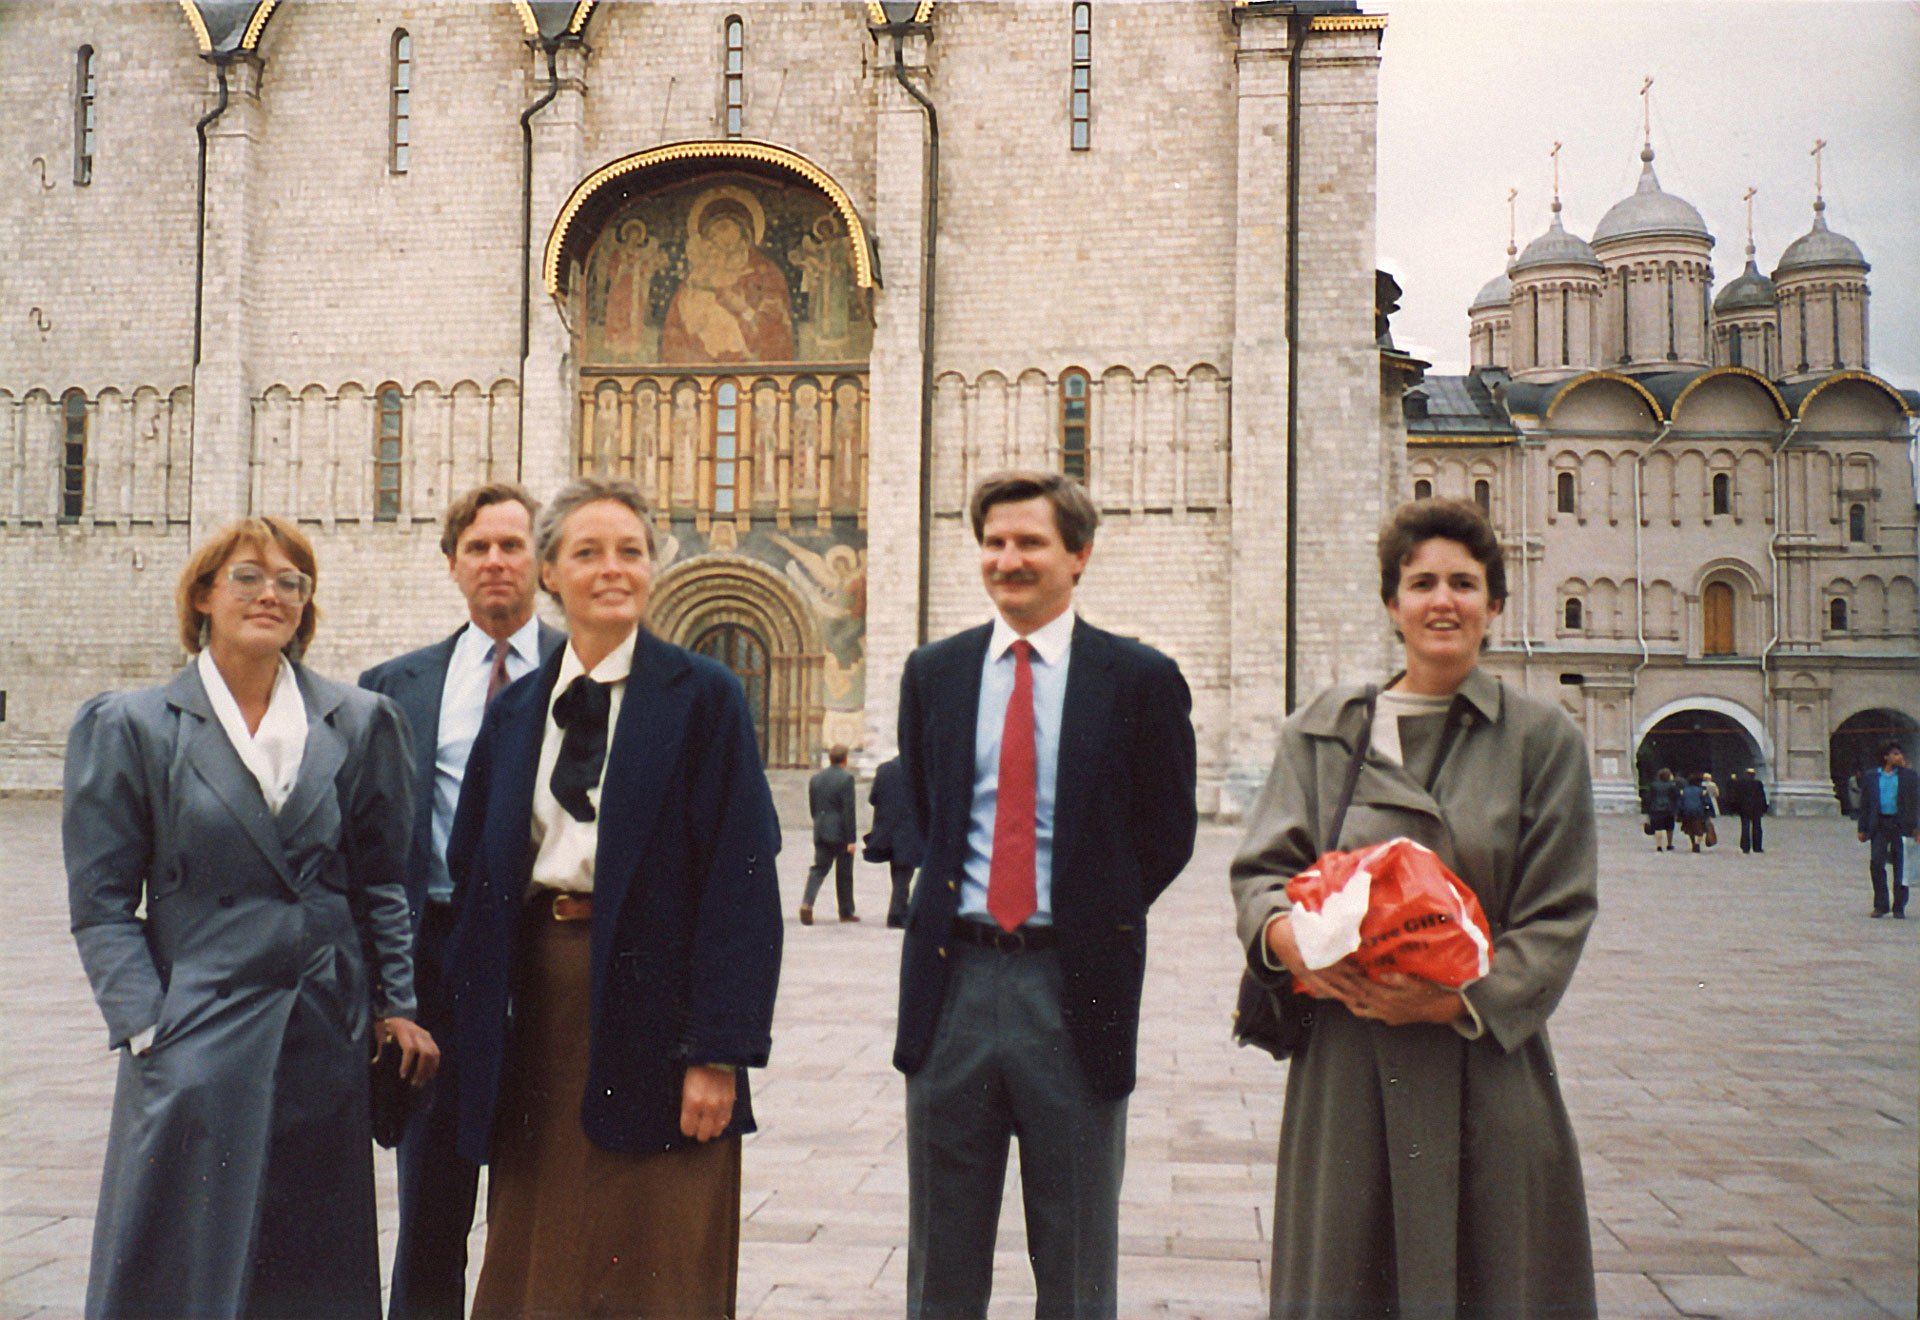 NRDC deputy executive director and future president Frances Beinecke (right) with her colleagues during a trip to the USSR for discussions on nuclear weapons.